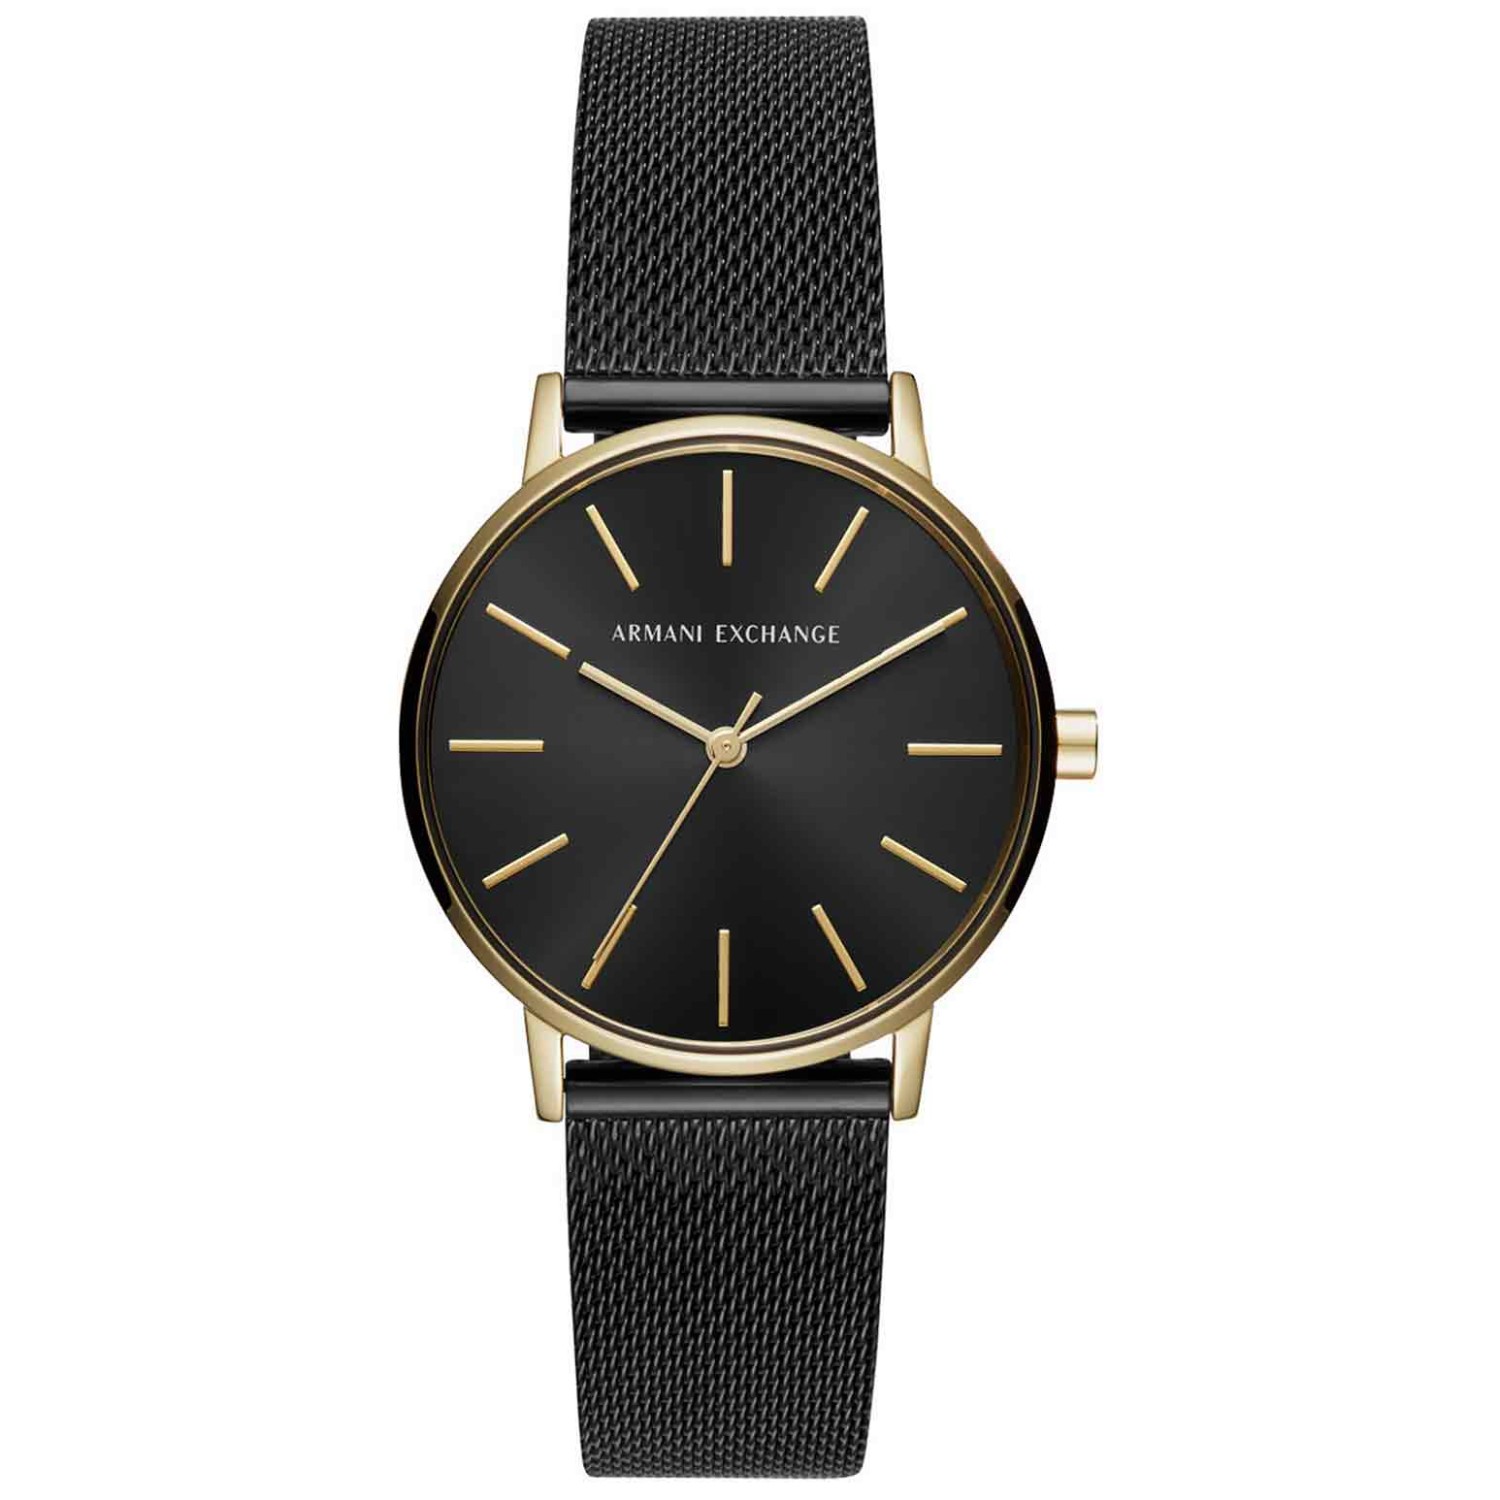 AX5548 A|X  Armani Exchange Watch. Polished gold-tone indexes accent the black sunray dial of this sleek Armani Exchange ladies watch, finished with a gold tone case and black mesh bracelet Humm -Buy Little things up to $1000 and choose 10 weekly @christi